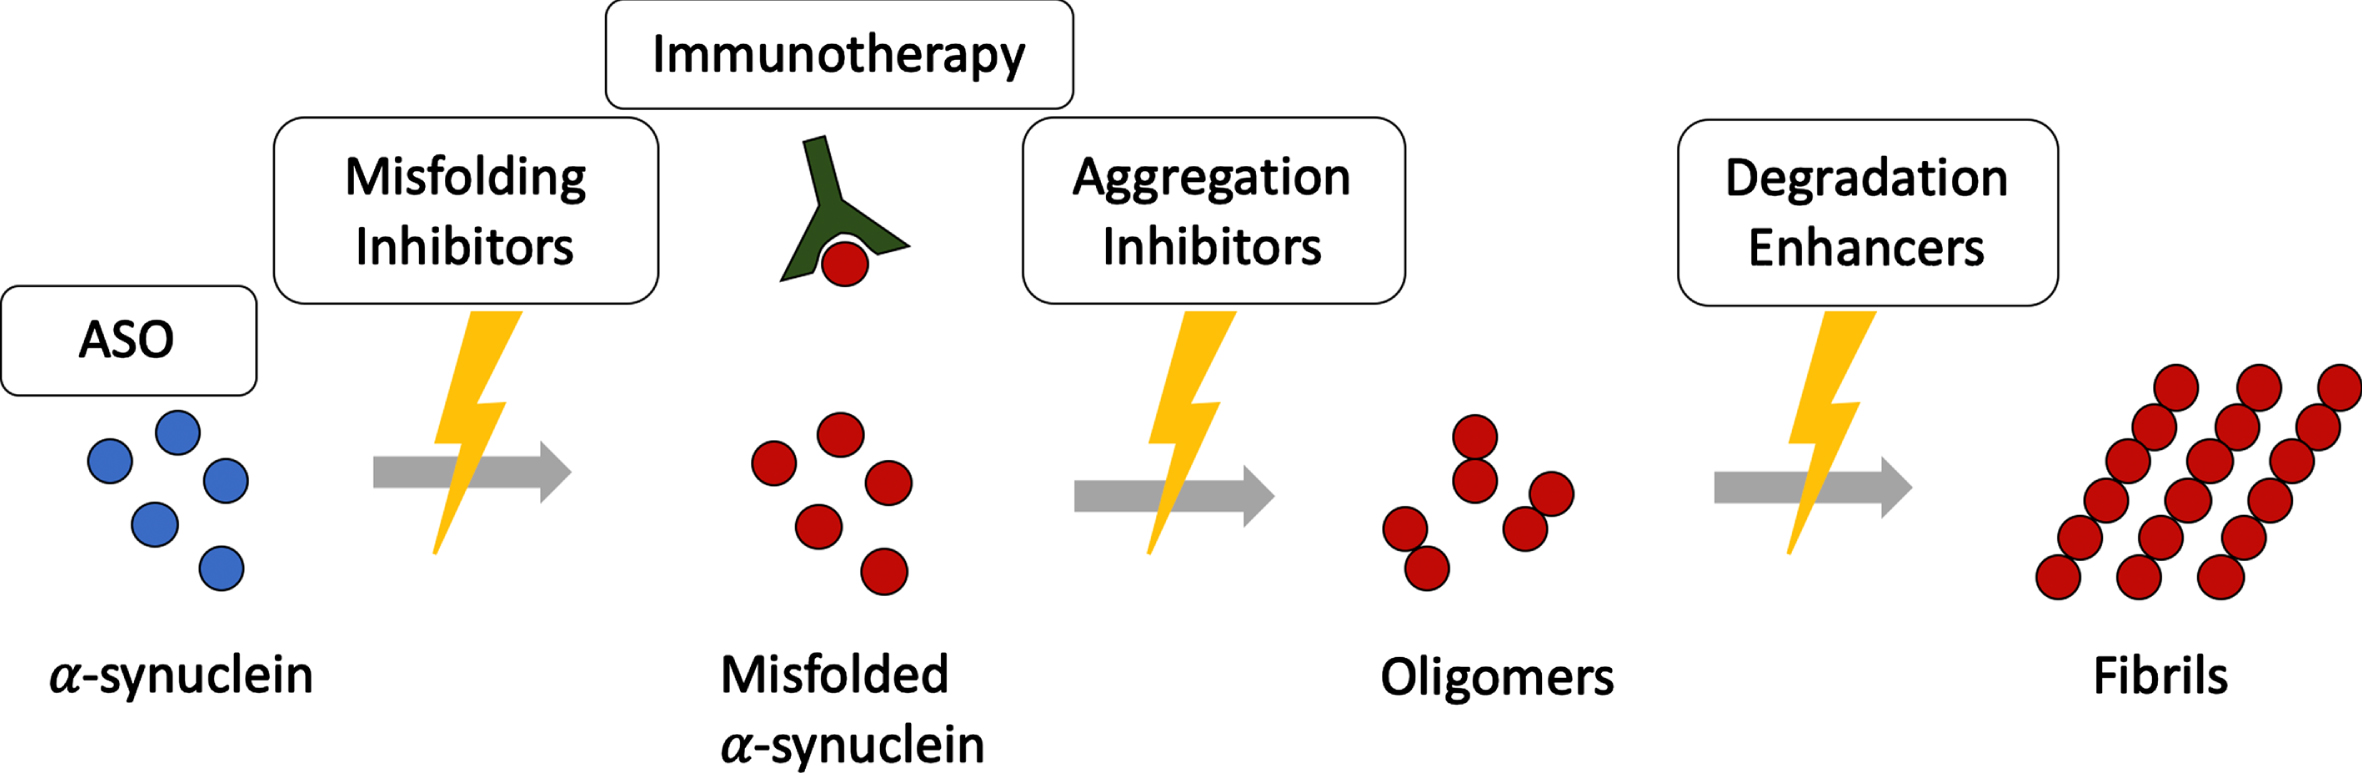 Disease modifying therapies targeting α-synuclein assemblies at different stages. Disease modifying therapies target different levels along the α-synuclein aggregation cascade. ASO, antisense oligonucleotides.